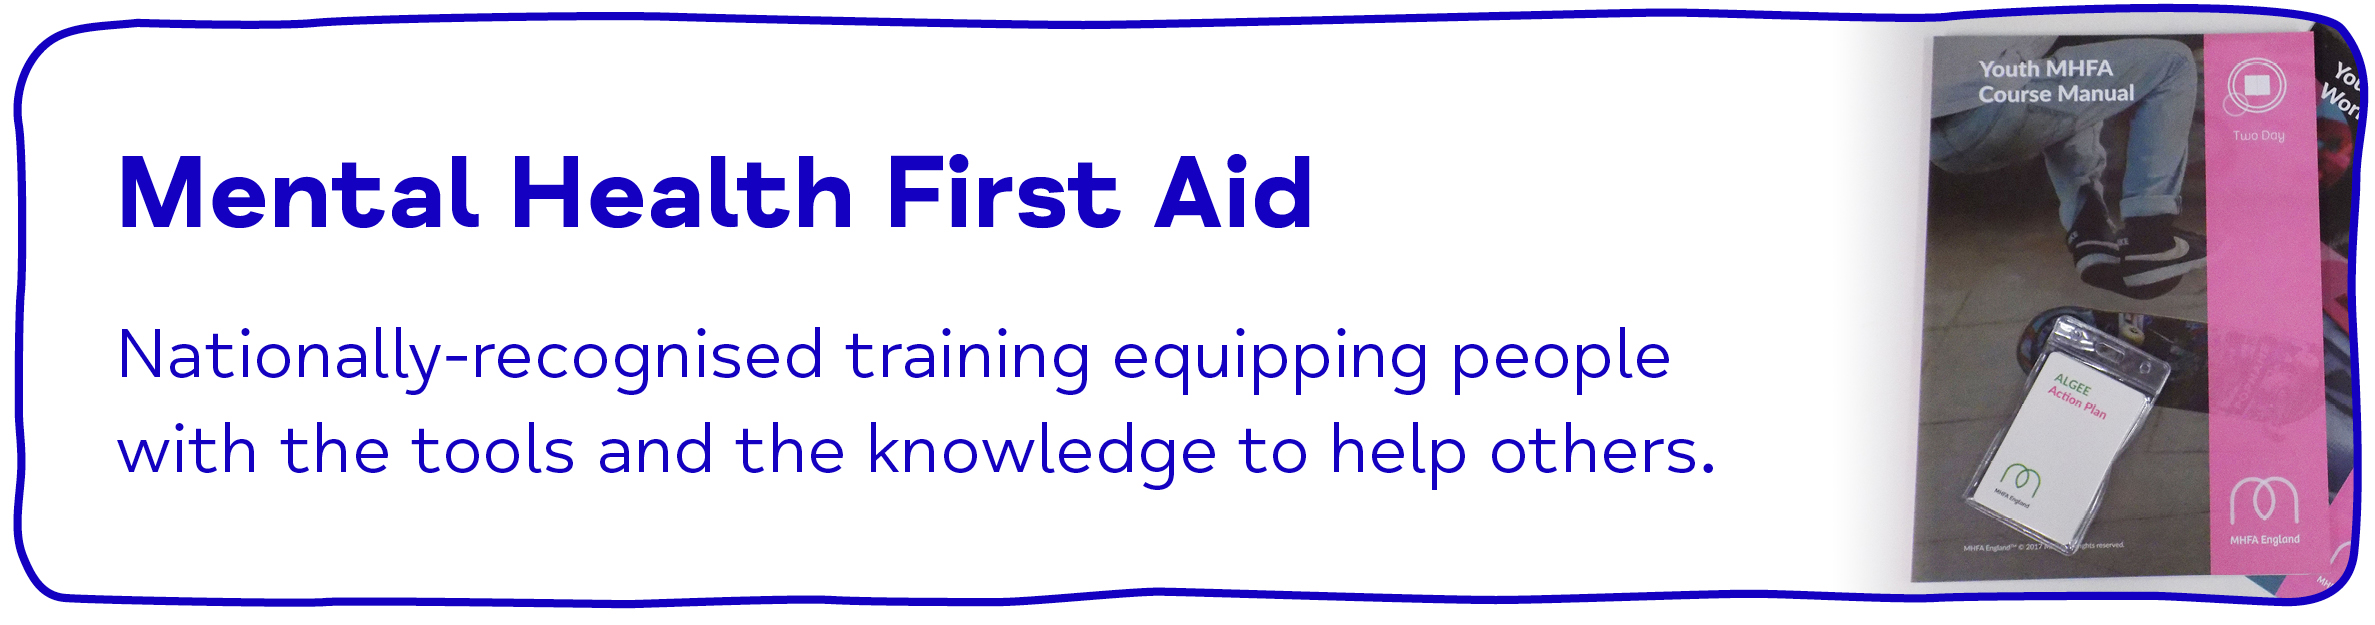 Mental Health First Aid - Nationally-recognised training equipping people with the tools and knowledge to help others.